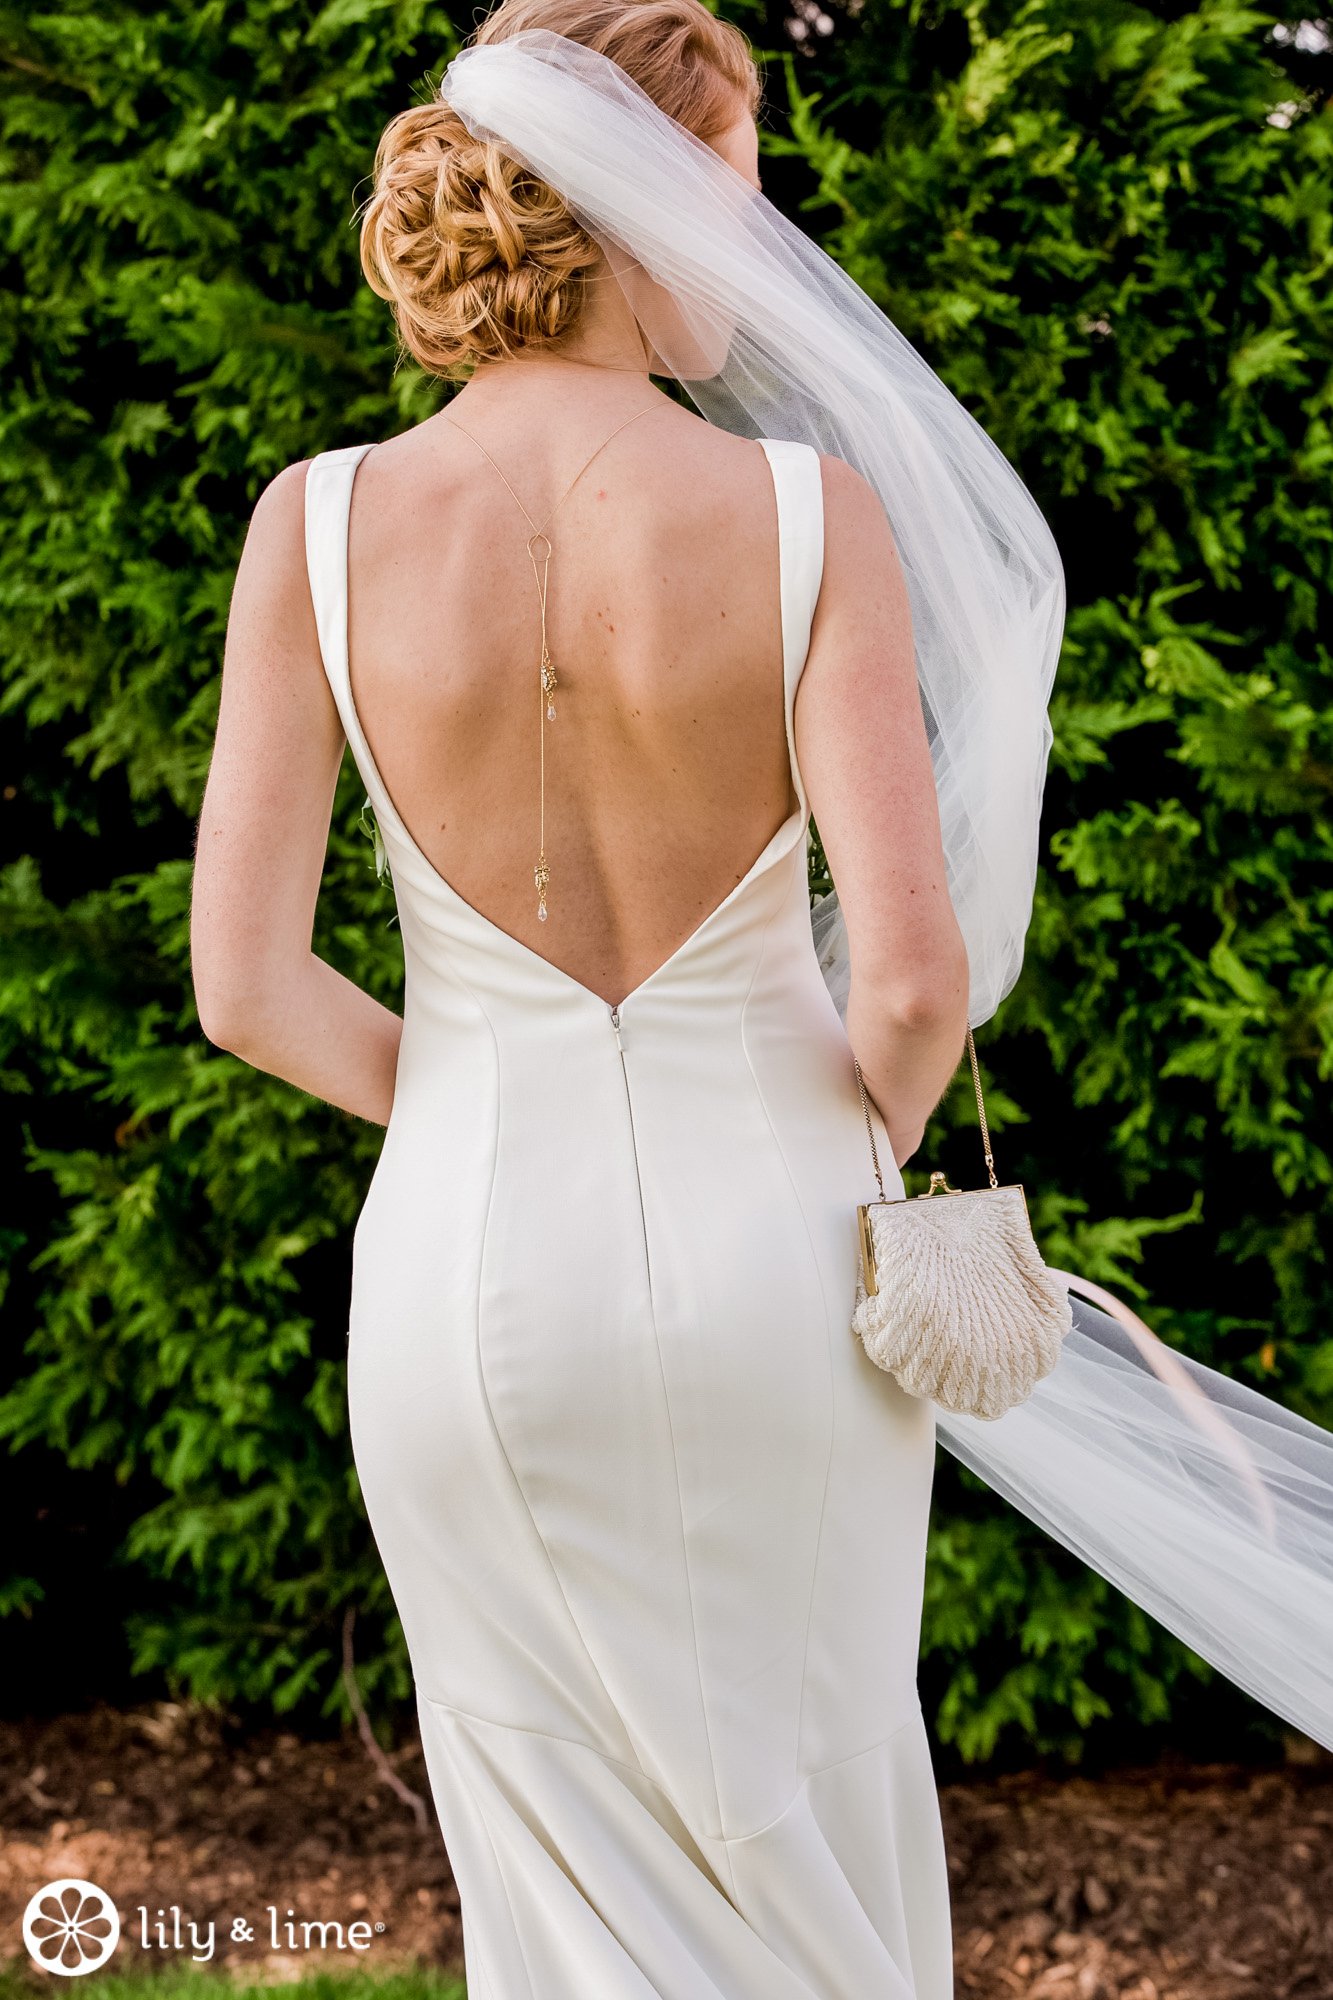 The Best Hairstyles For Your Wedding Dress Neckline | Sugar Weddings &  Parties